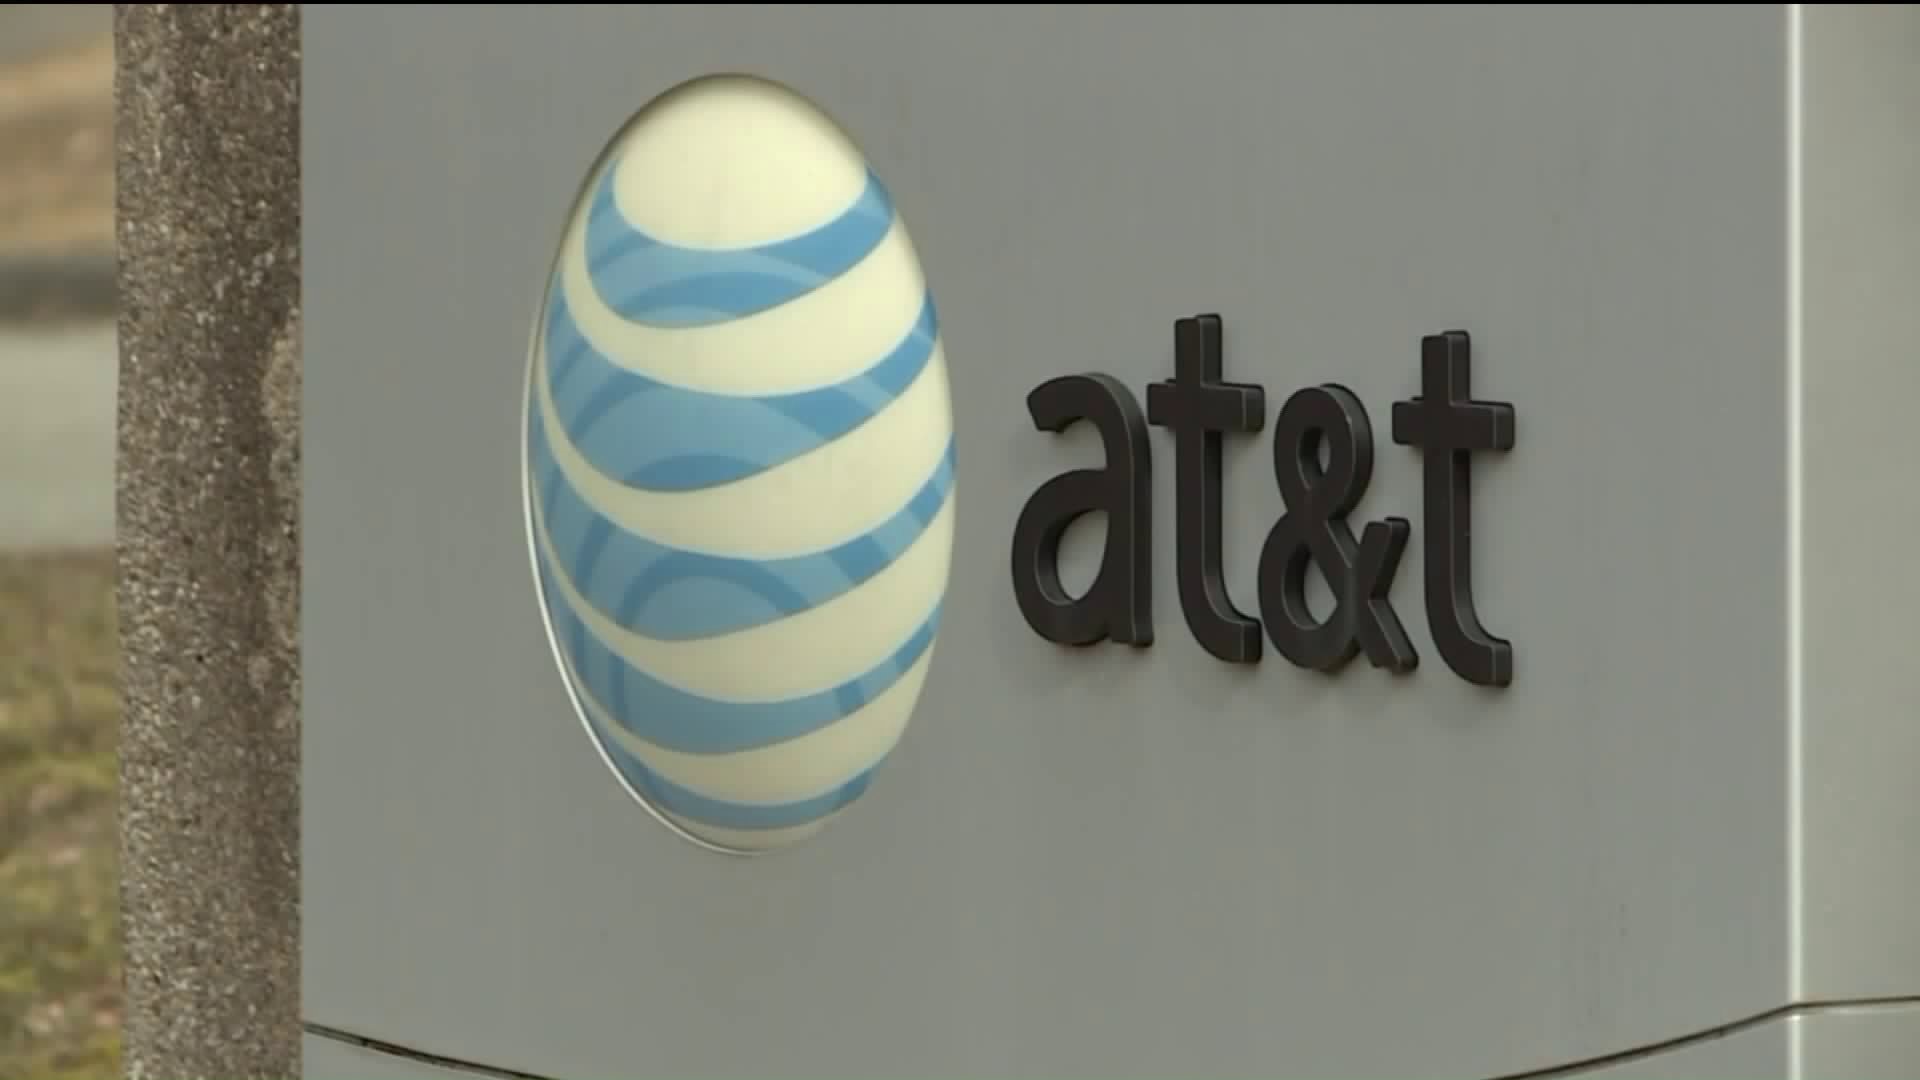 AT&T`s Meriden employees have big decision to make